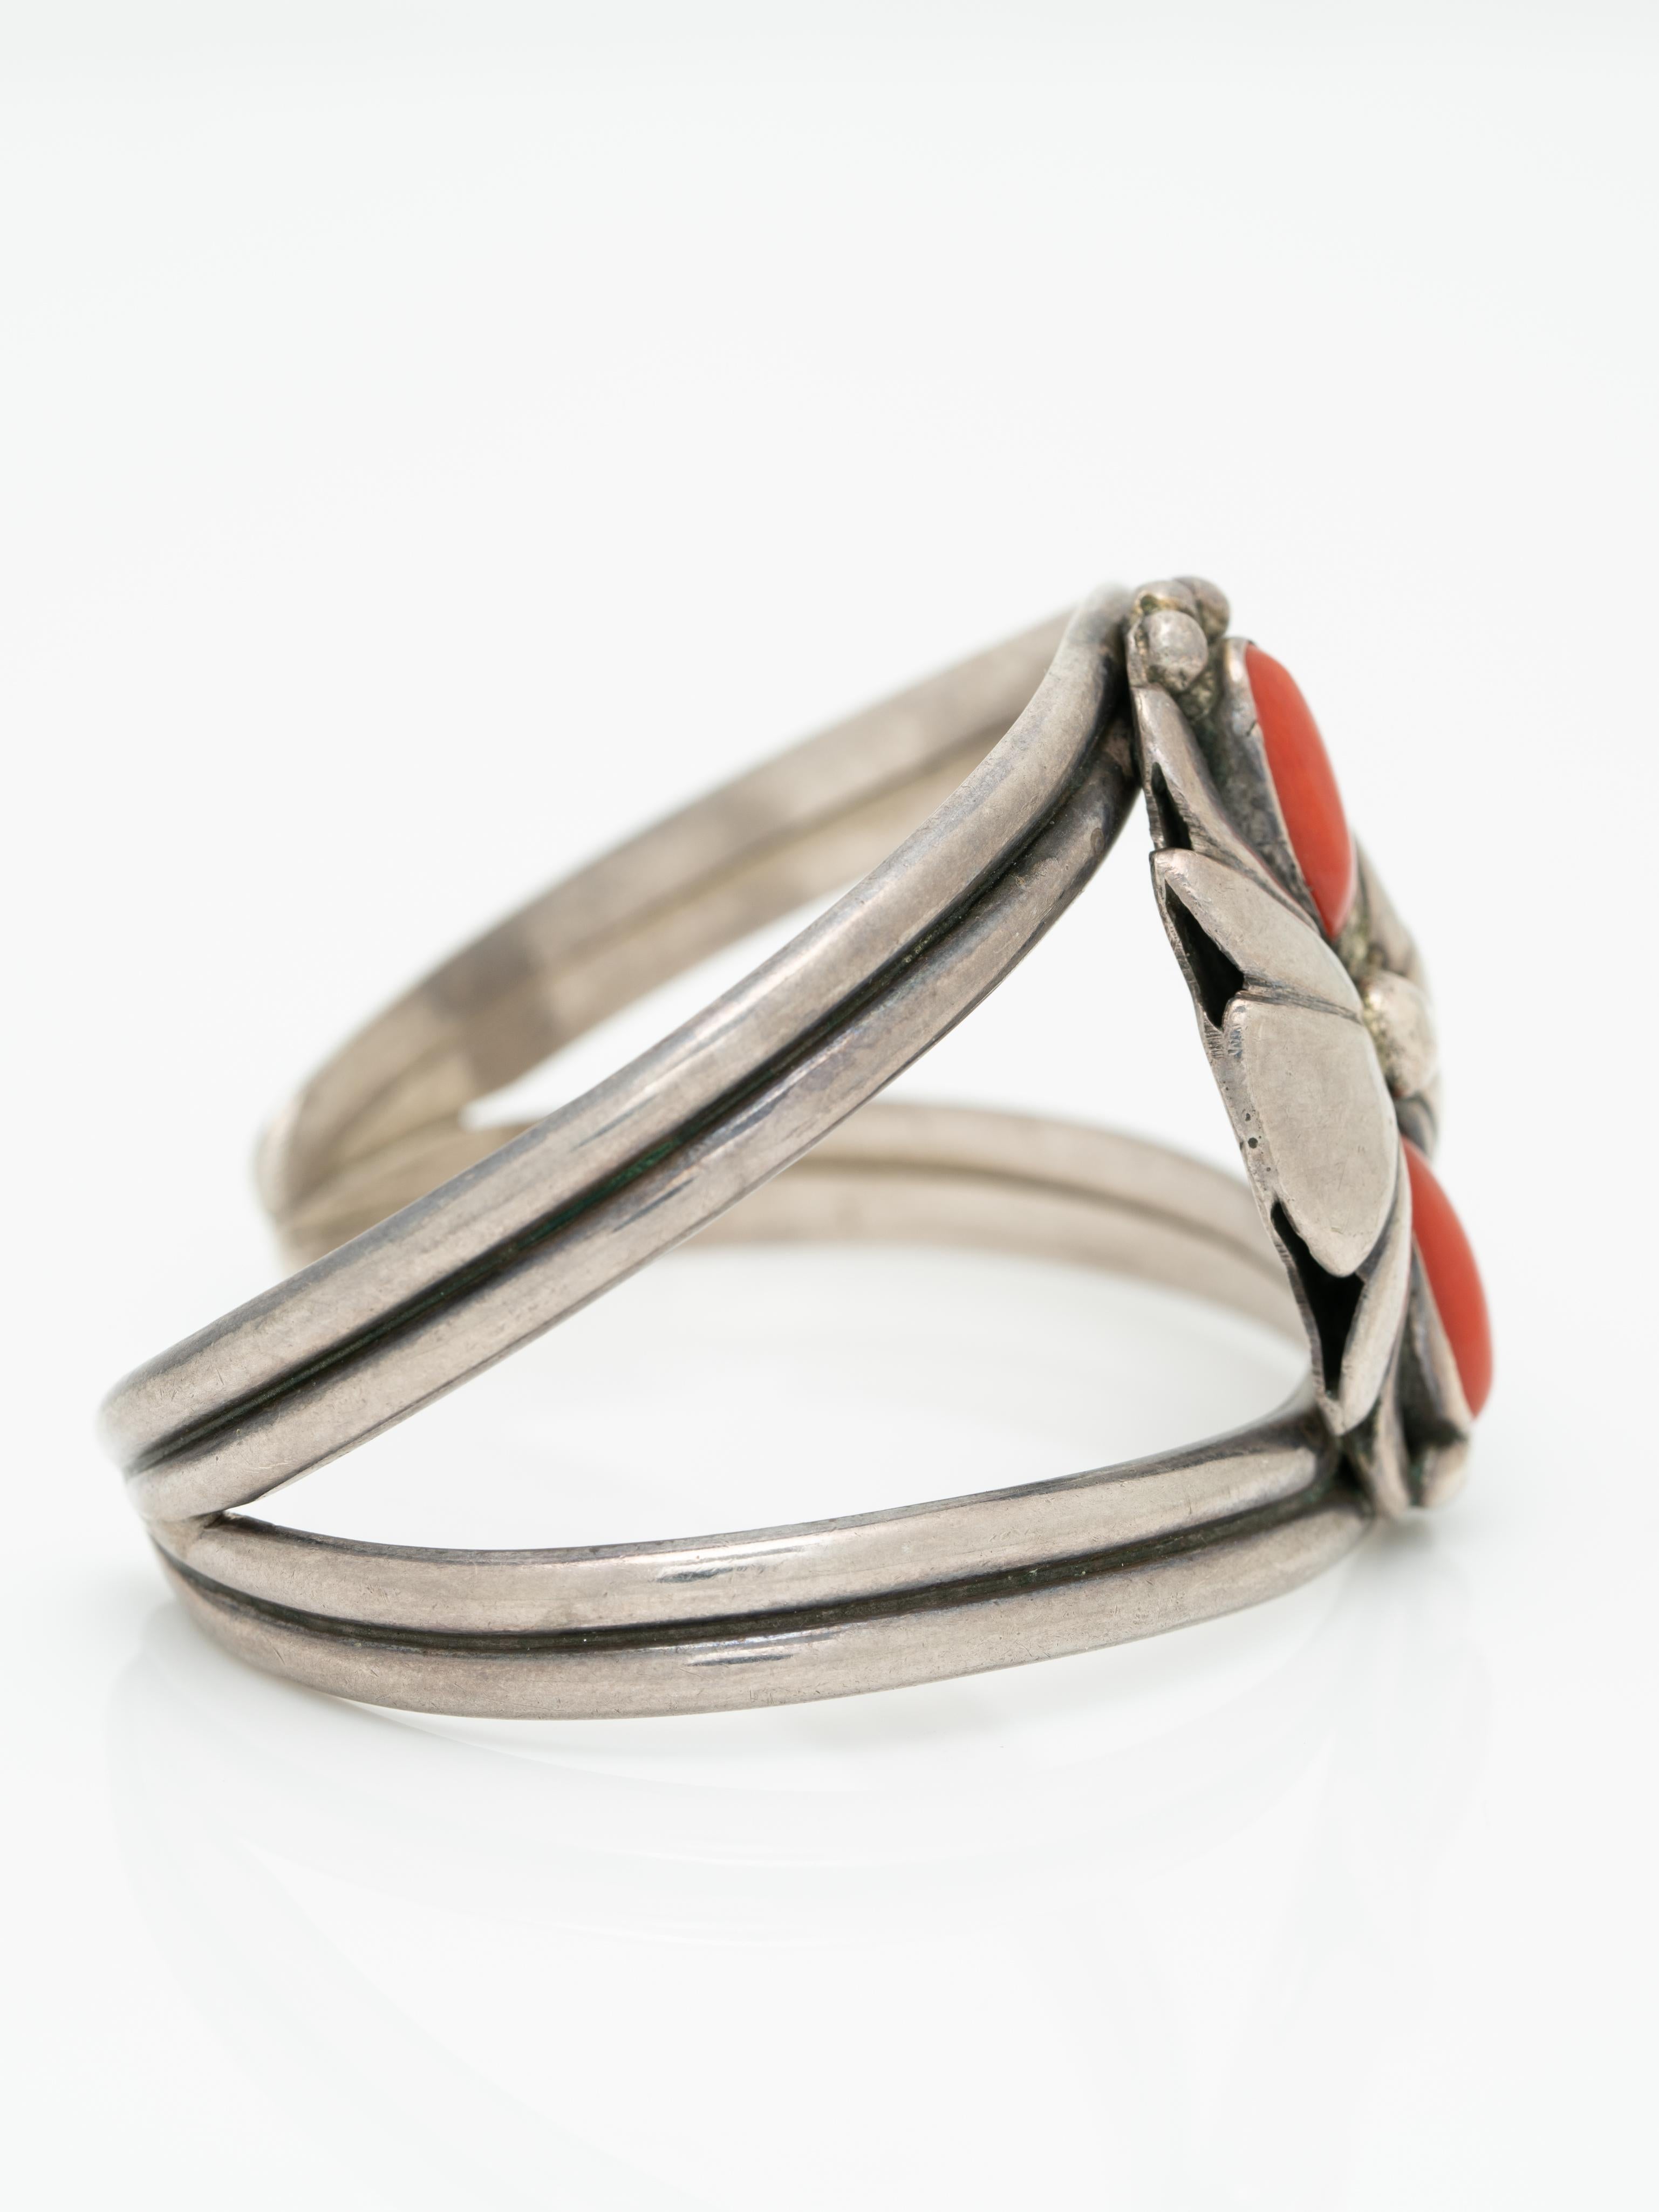 Oval Cut Vintage Native American Sterling Silver and Coral Navajo Cuff Bracelet